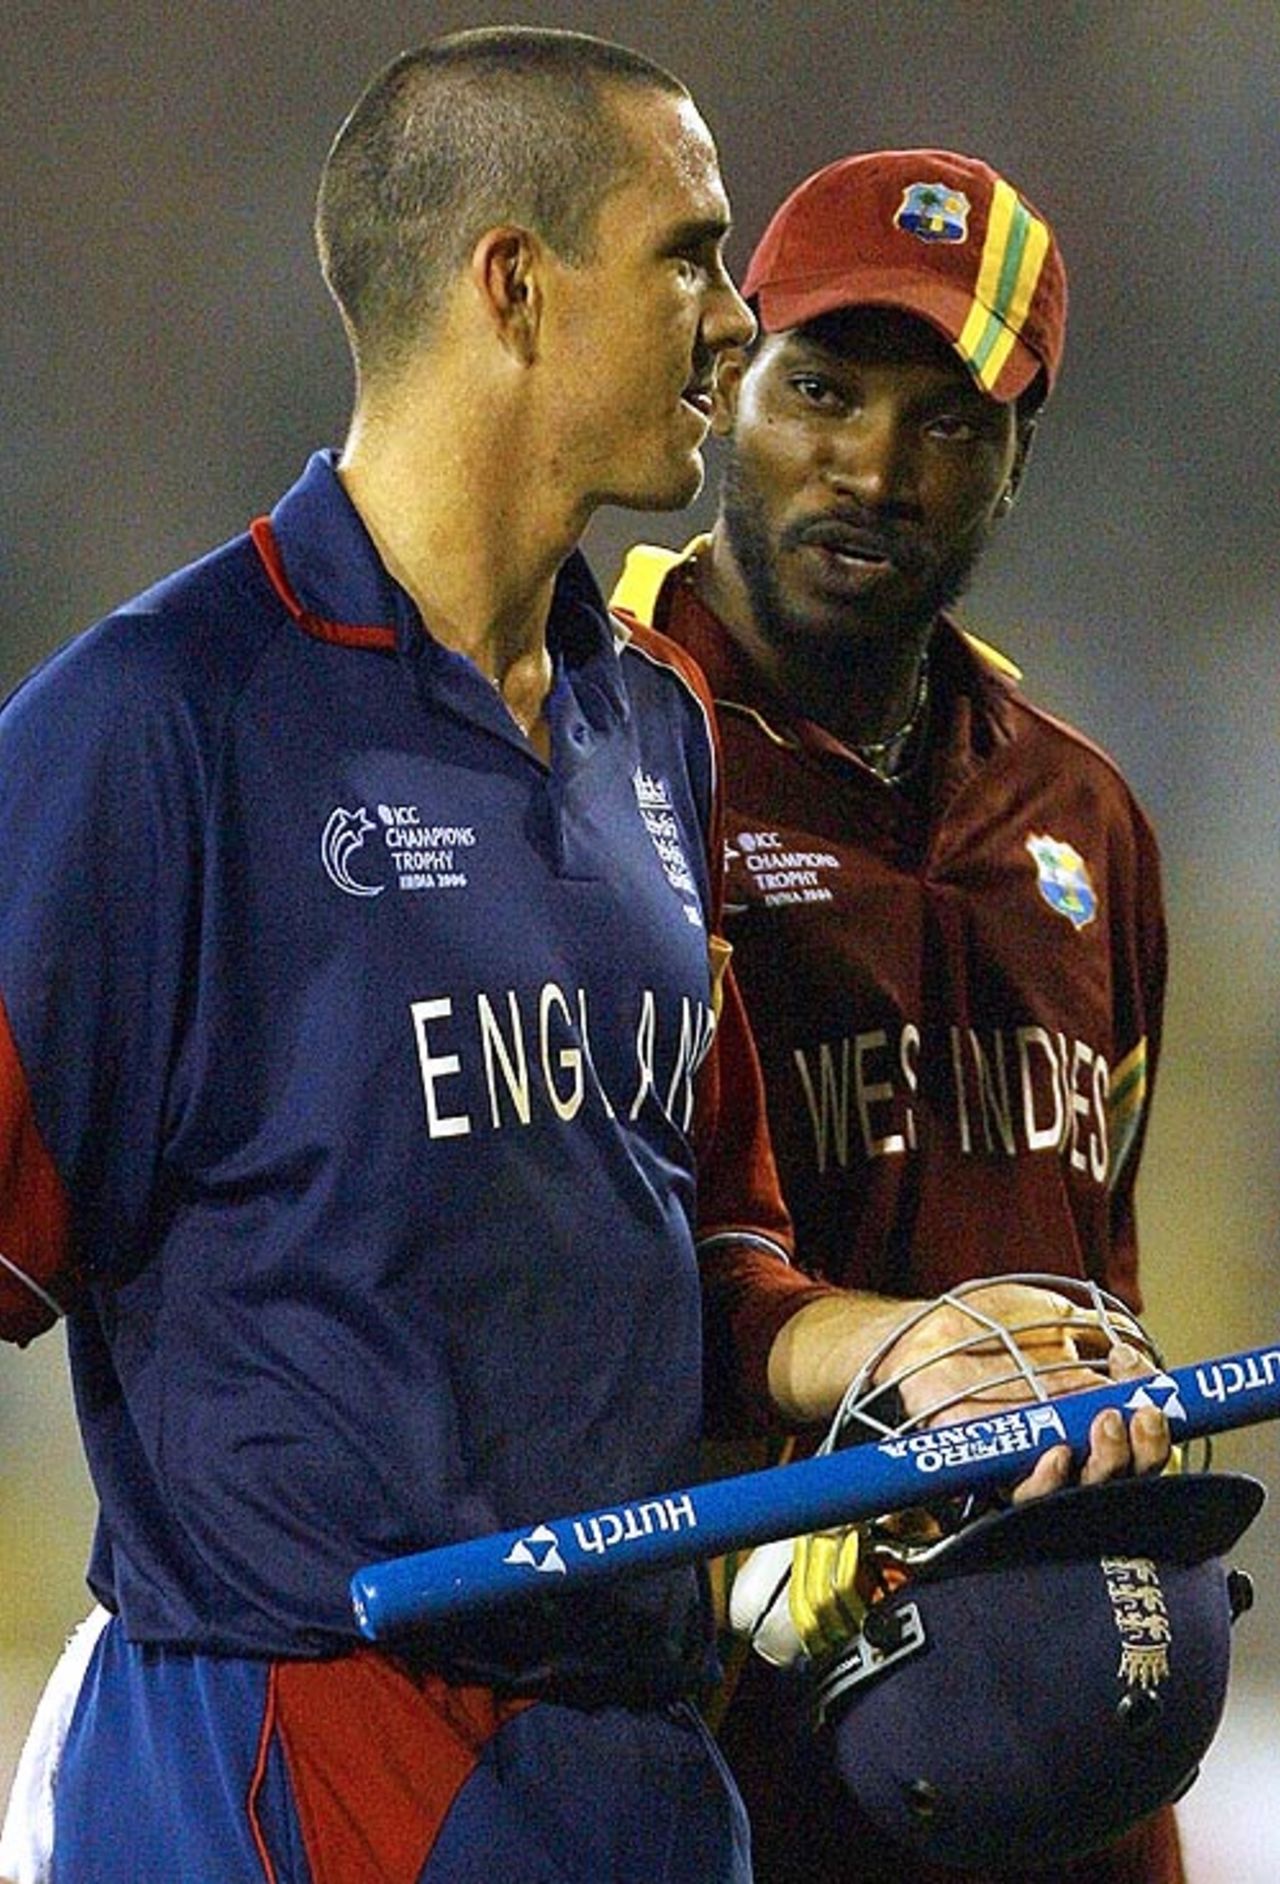 Kevin Pietersen's blistering 90 upstaged Chris Gayle's century, 17th match, Champions Trophy, Ahmedabad, October 28, 2006